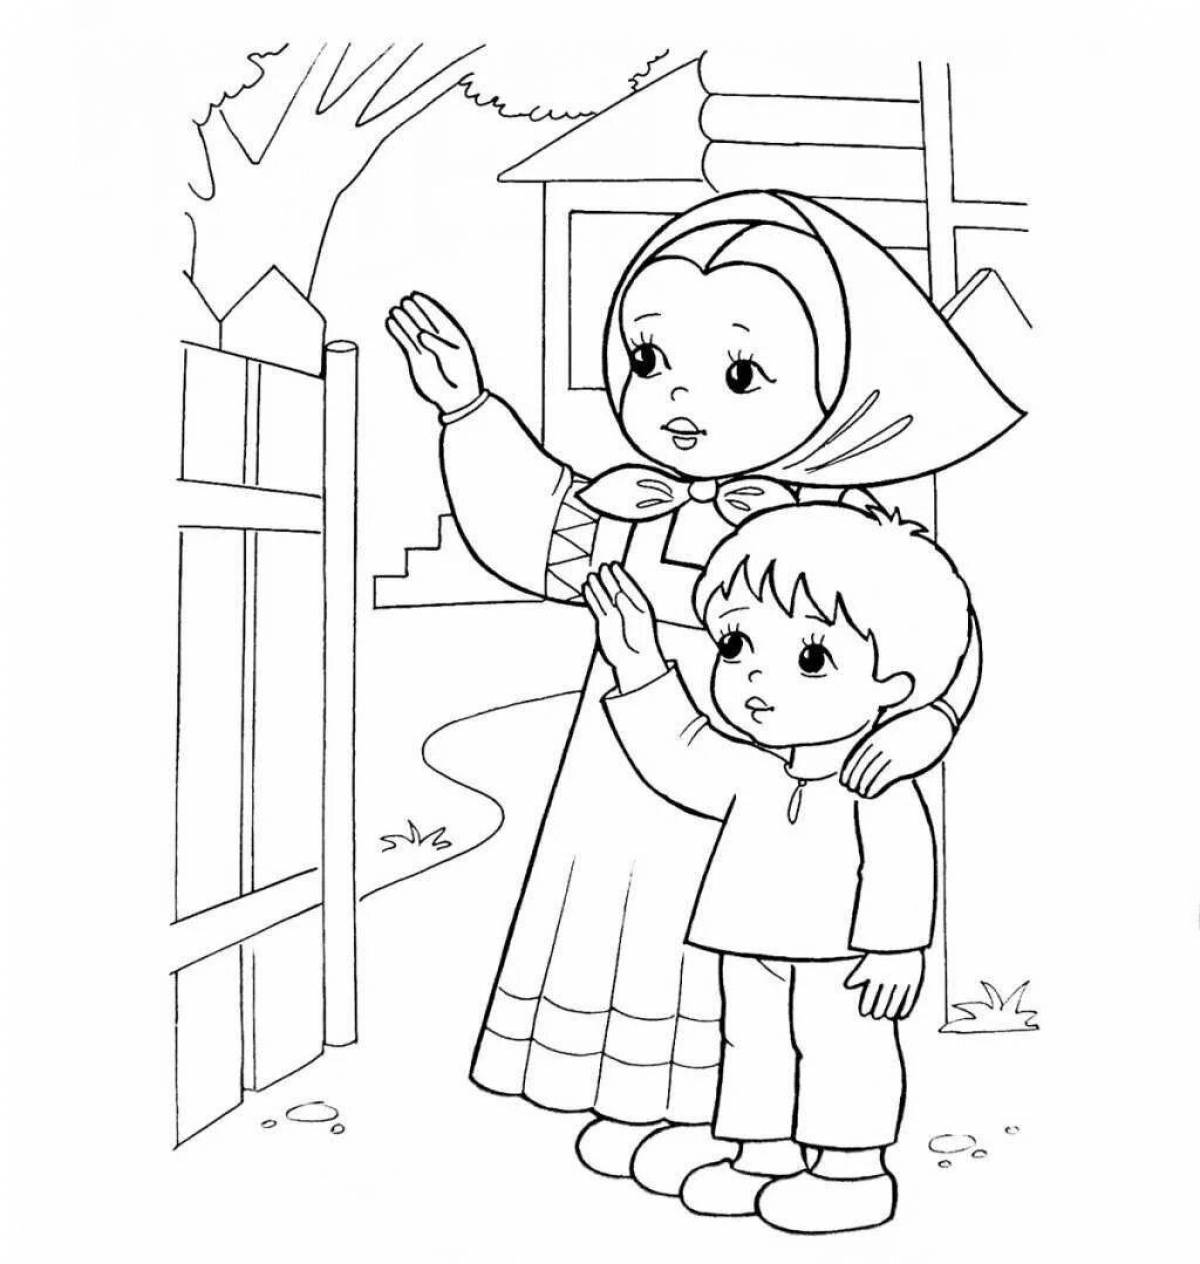 Adorable swan geese coloring pages for babies